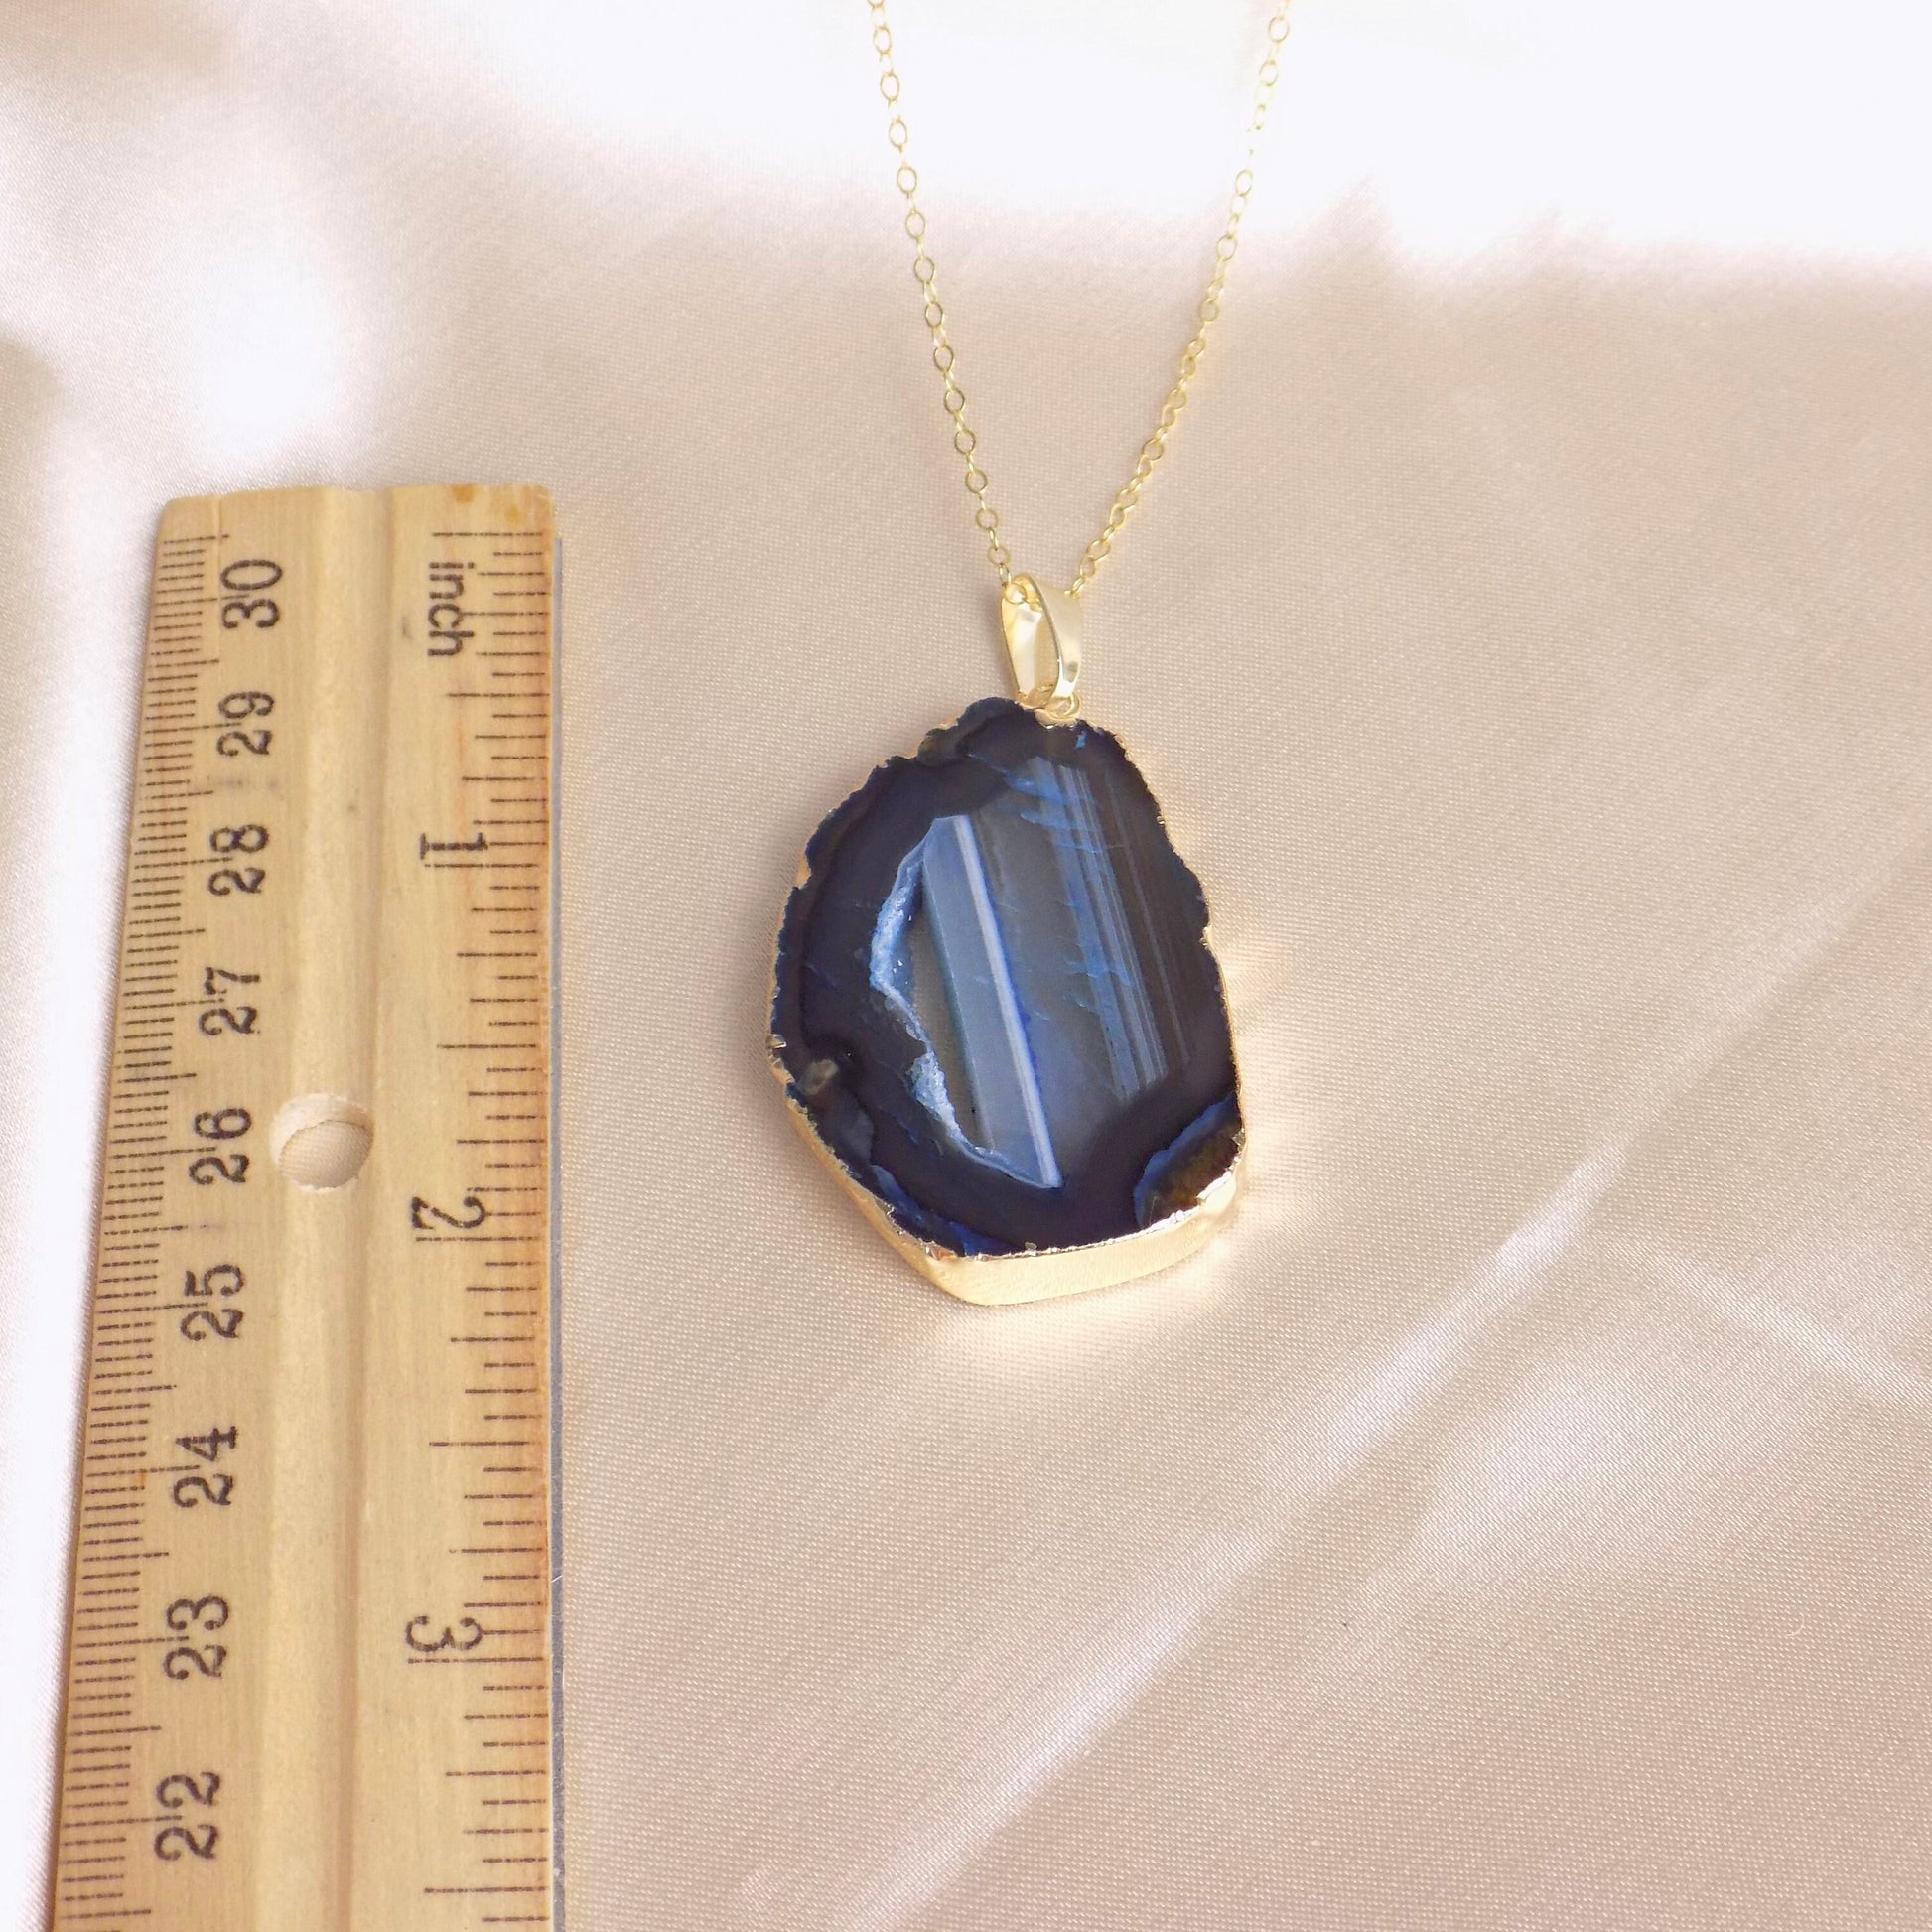 Black Geode Necklace Gold, Unique Druzy Crystal Pendant, Personalized Christmas Gift For Her, G14-753